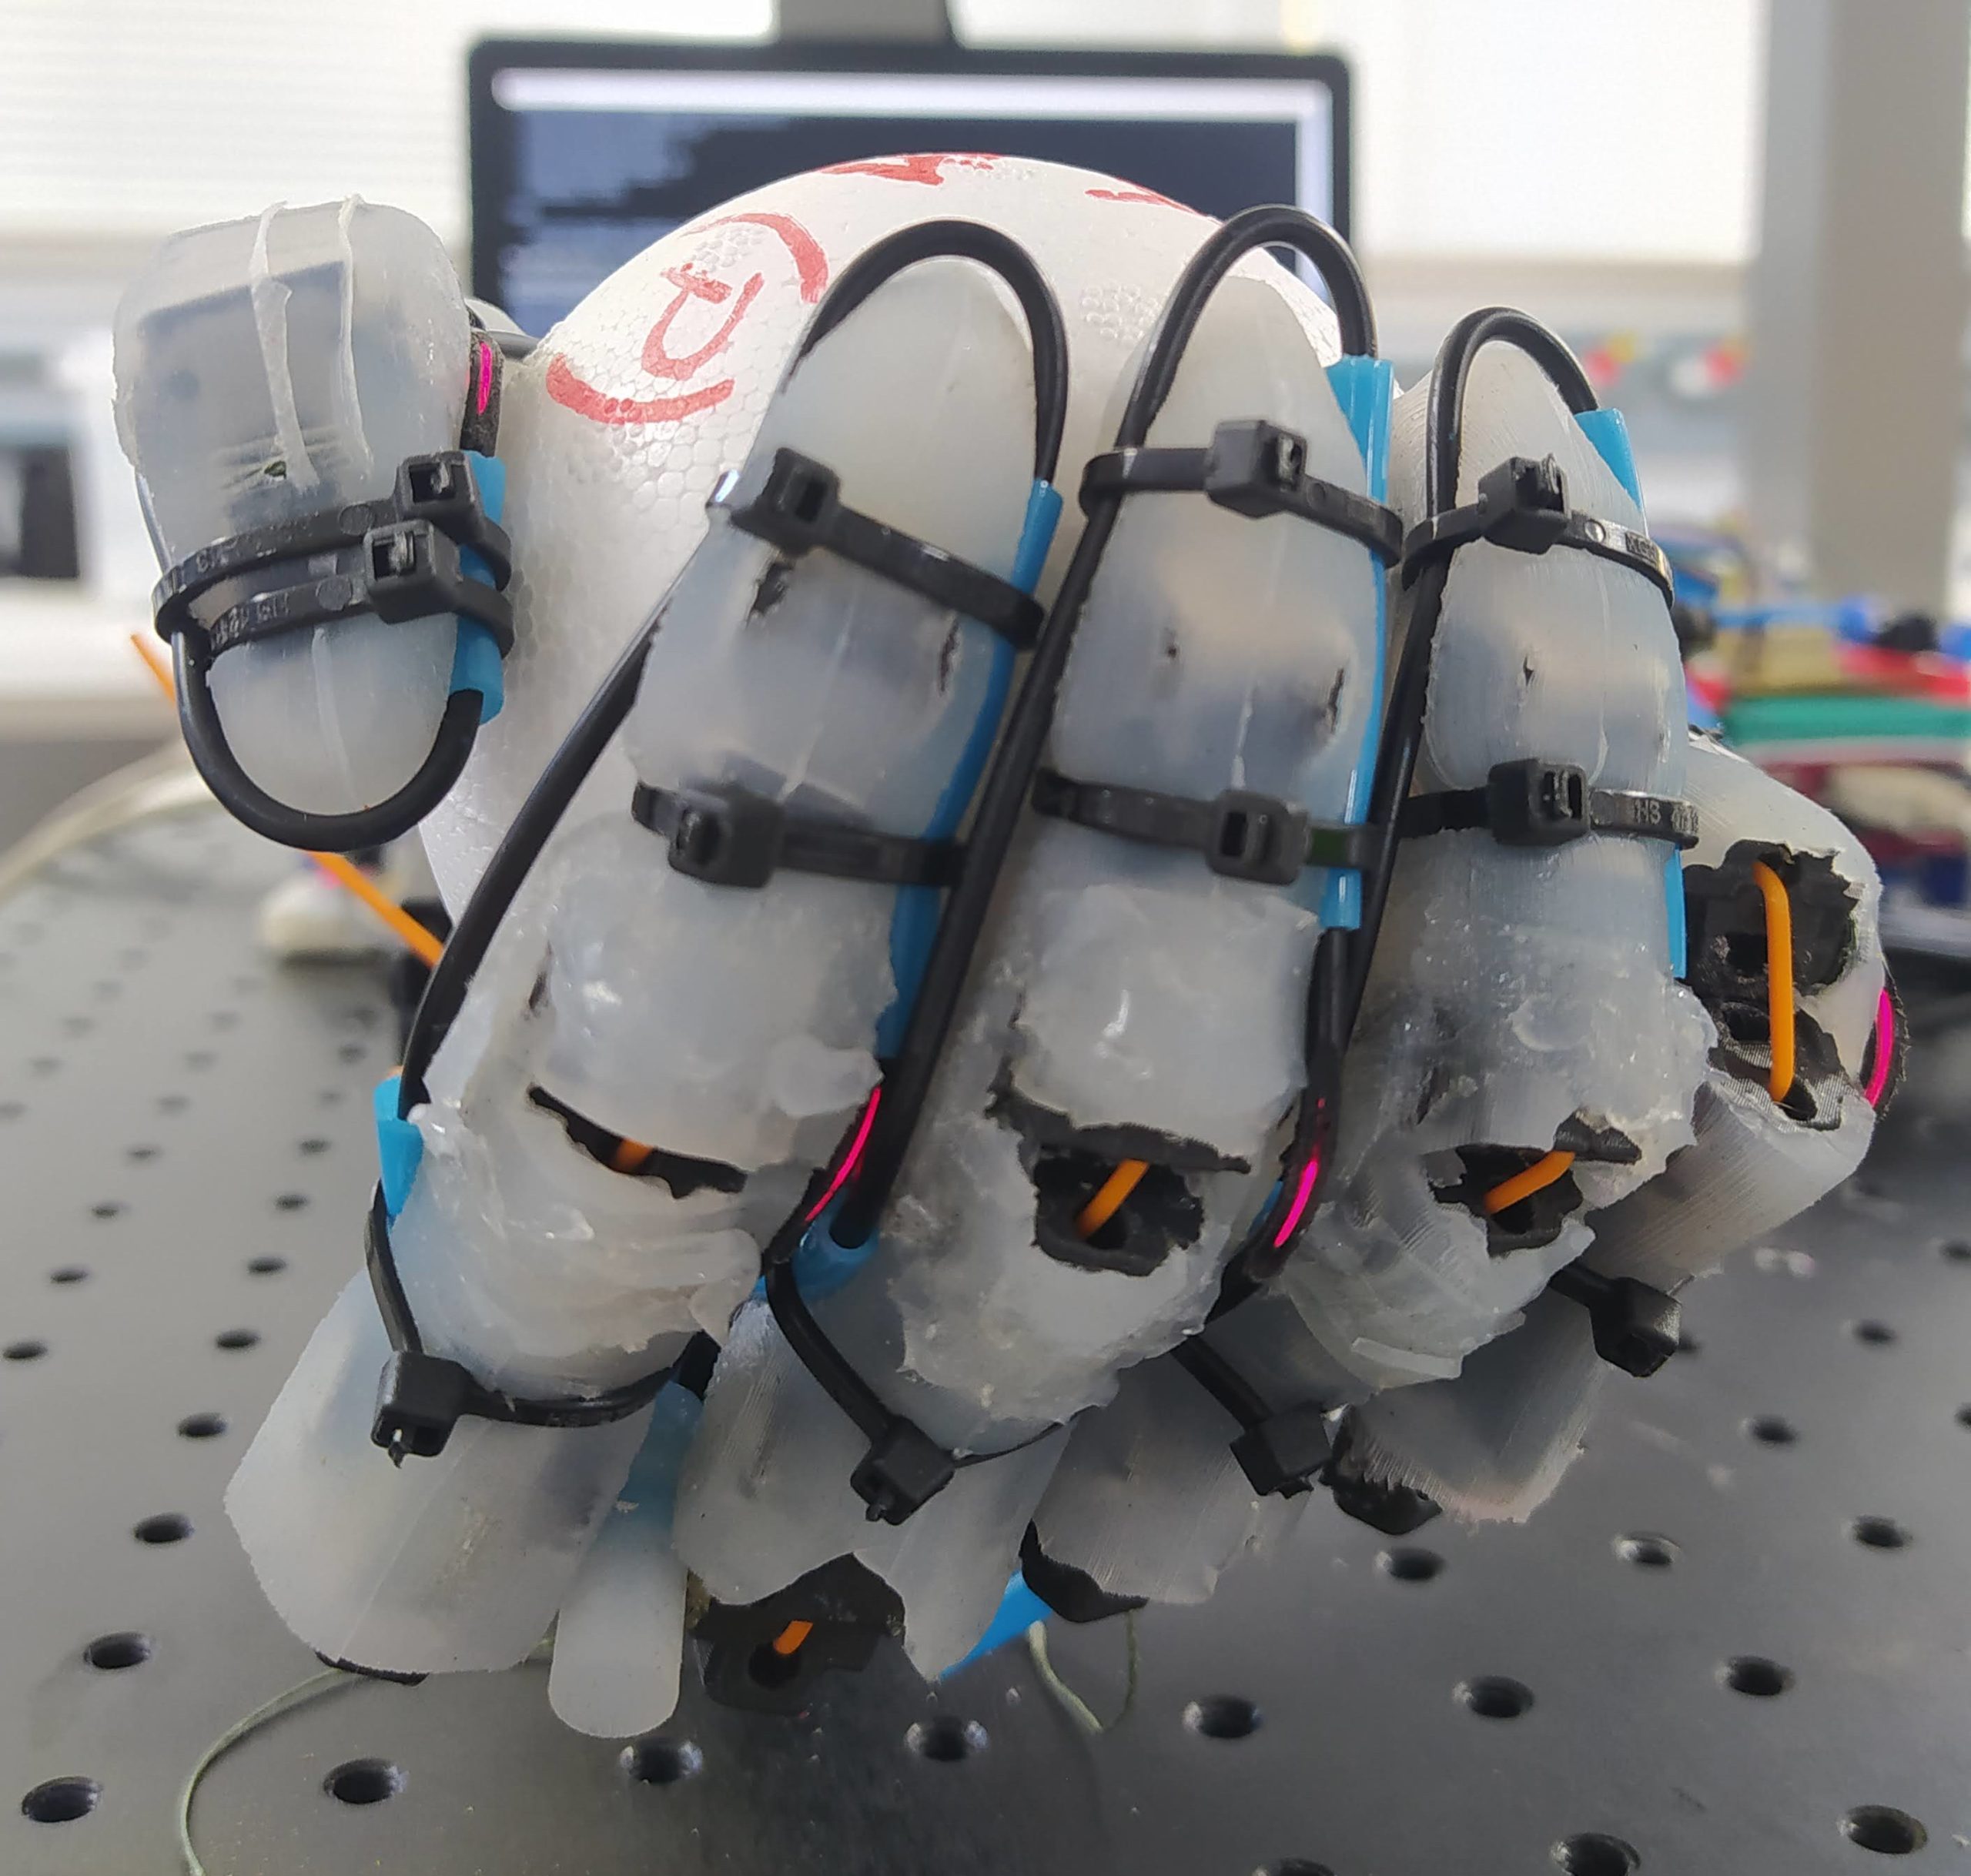 Research in partnership with LabTel designs a robotic hand